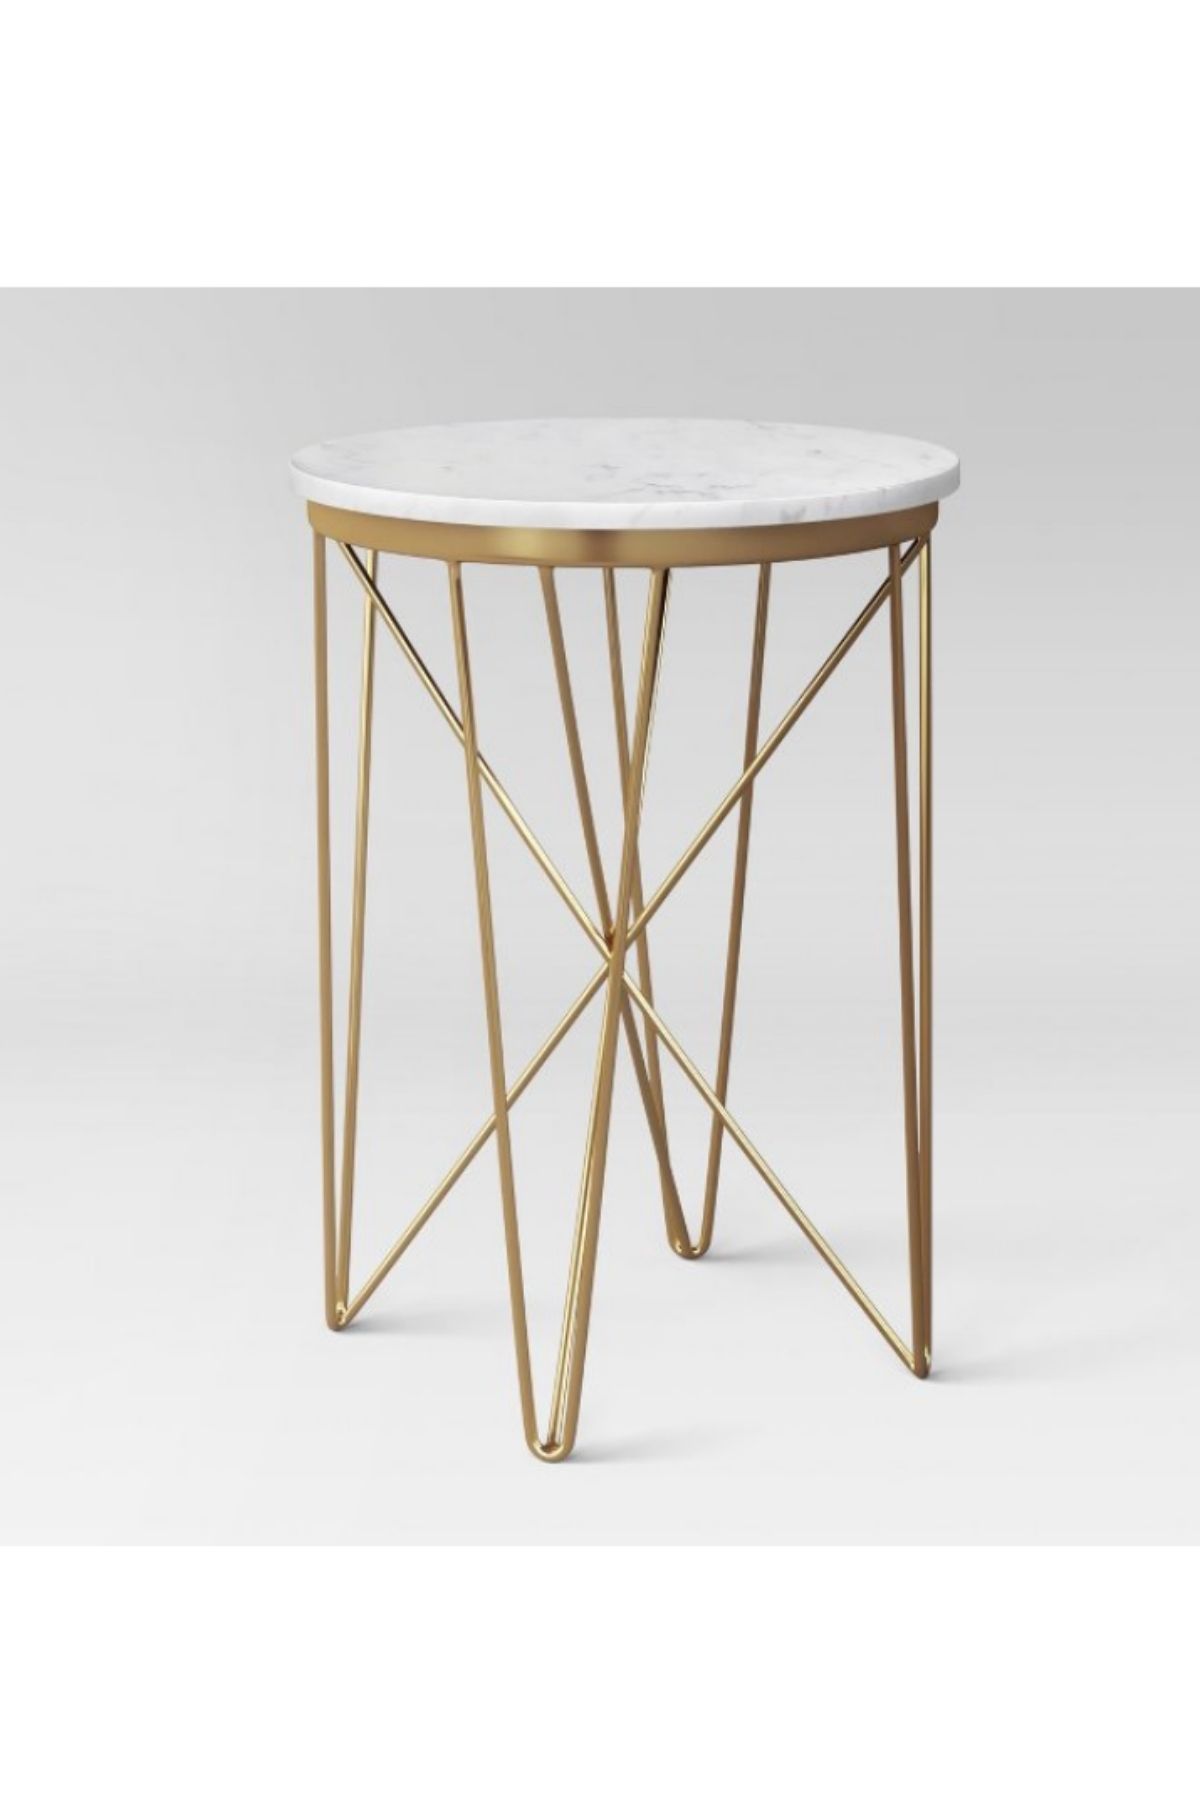 Product photo of gold side table.